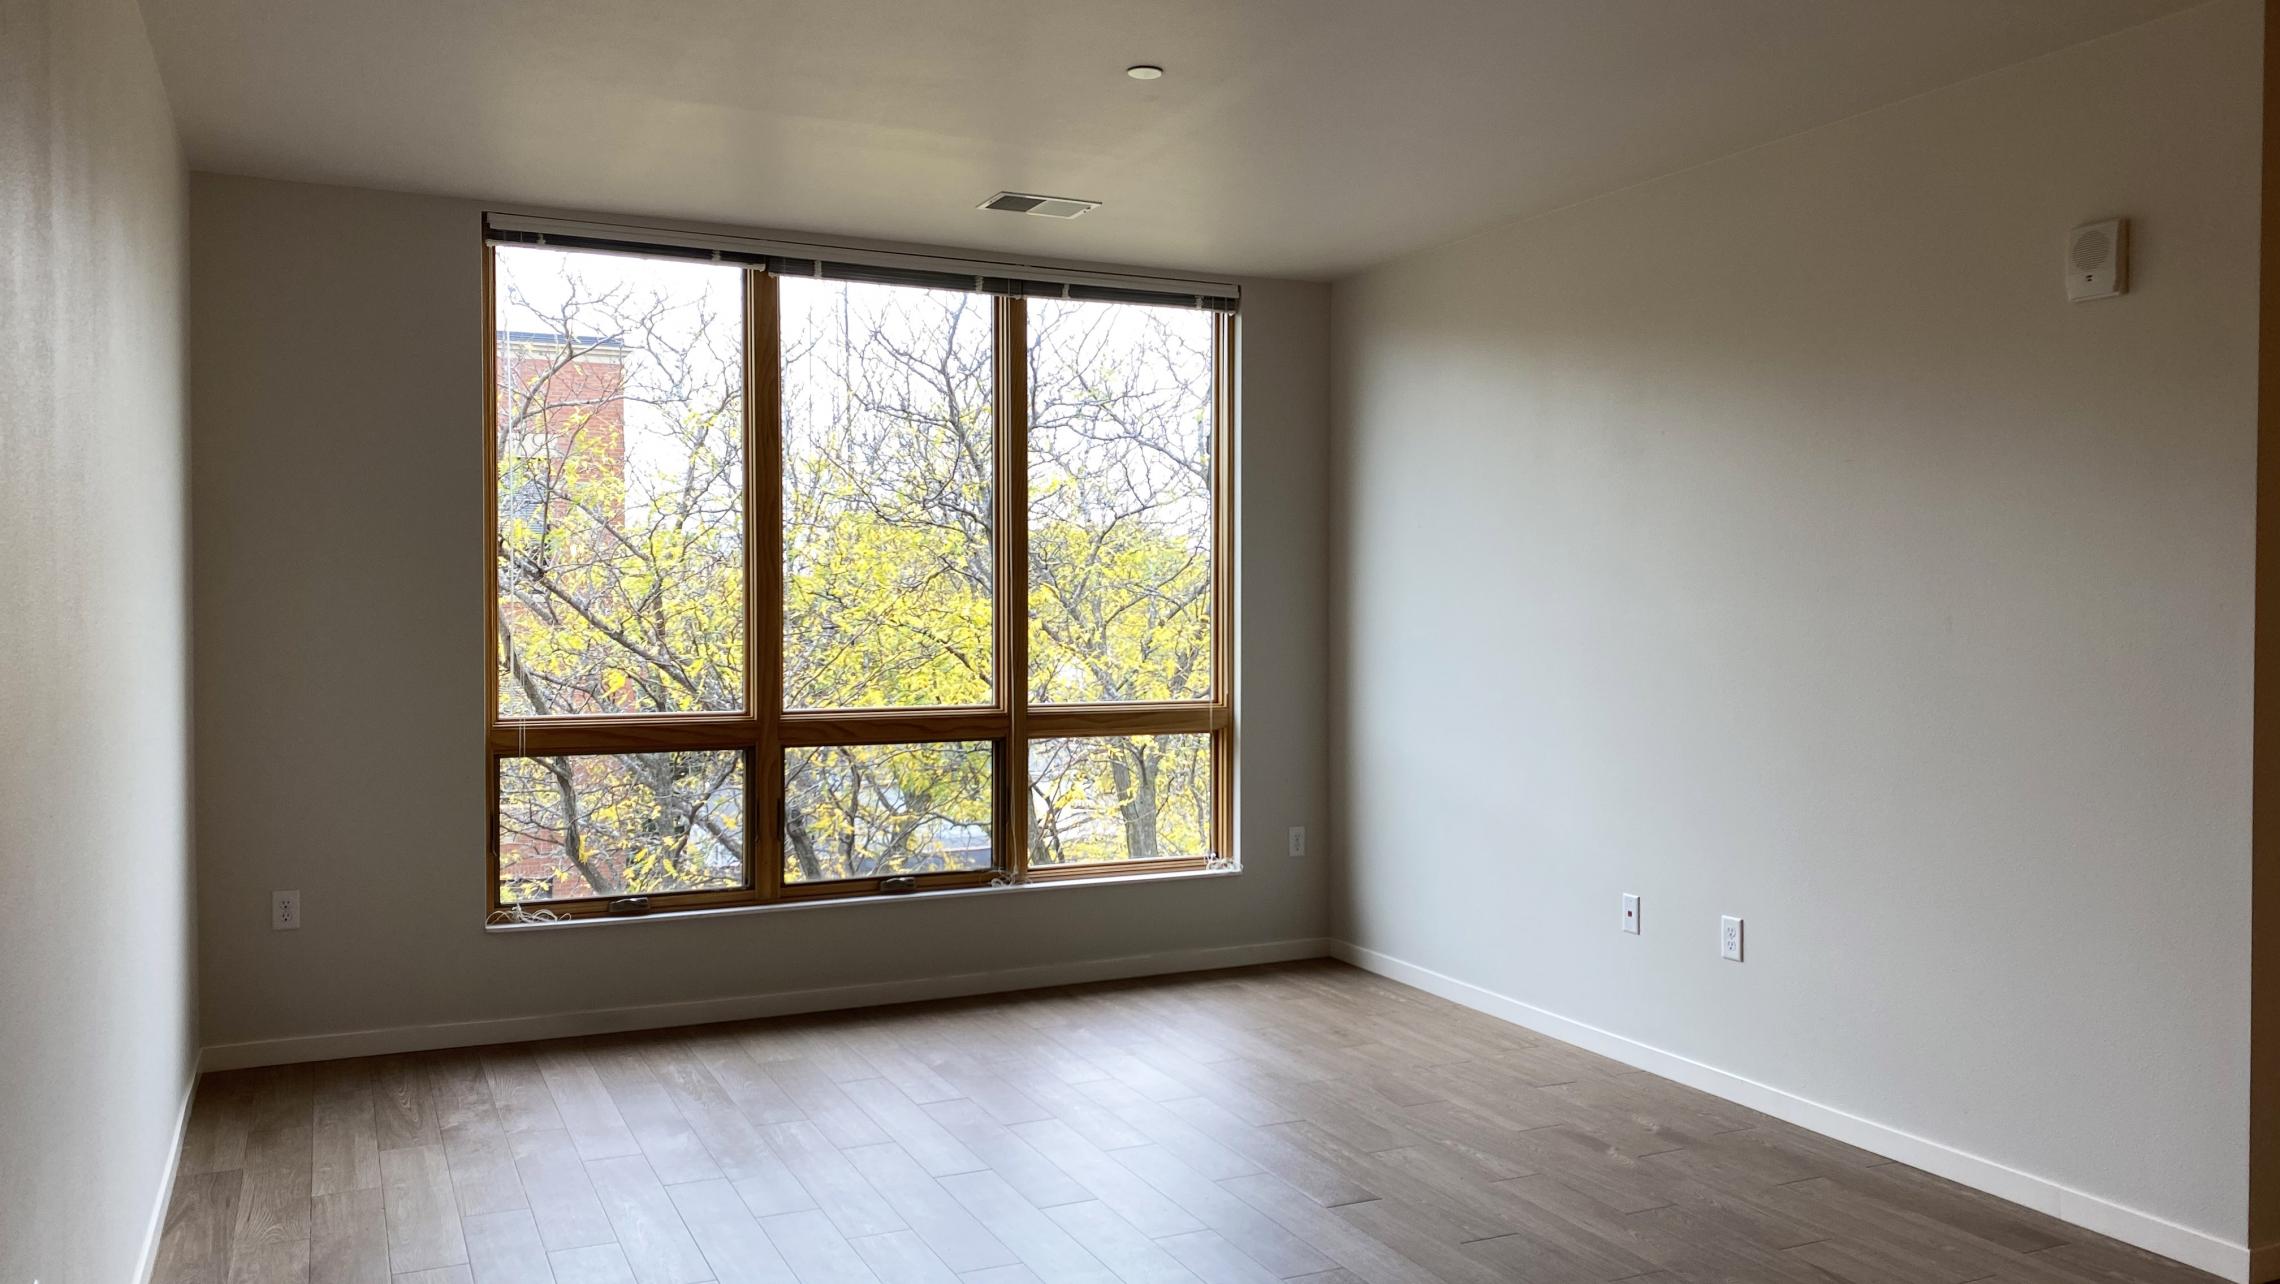 Quarter-Row-At-The-Yards-Apartment-417-Two-Bedroom-Top-Floor-Downtown-Madison-Bike-Lake-Modern-Upscale-Fitness-Terrace-Courtyard-Lounge-Coffee-Shop-Cats-Dogs-Lifestyle